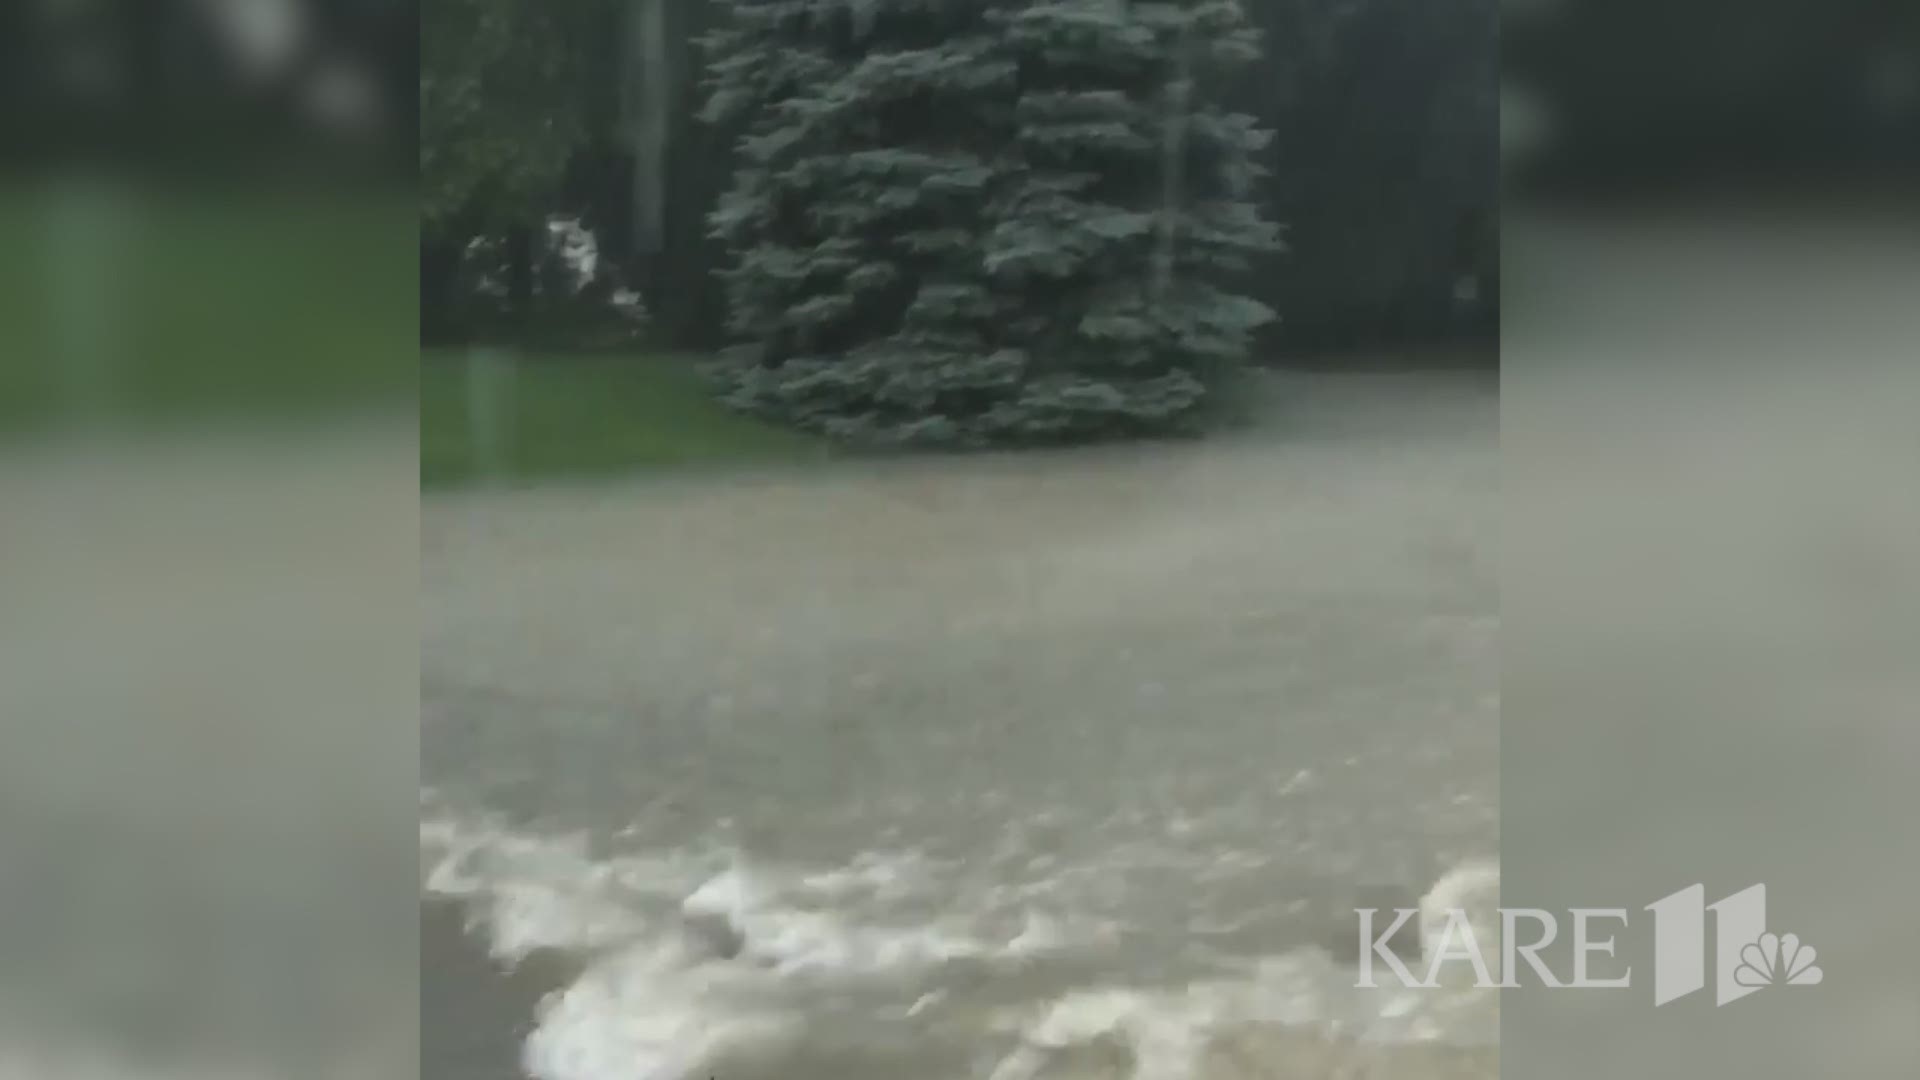 Flooding in Plymouth, MN was sent in by Michael Fandel on July 15, 2019 around 4:30 p.m.